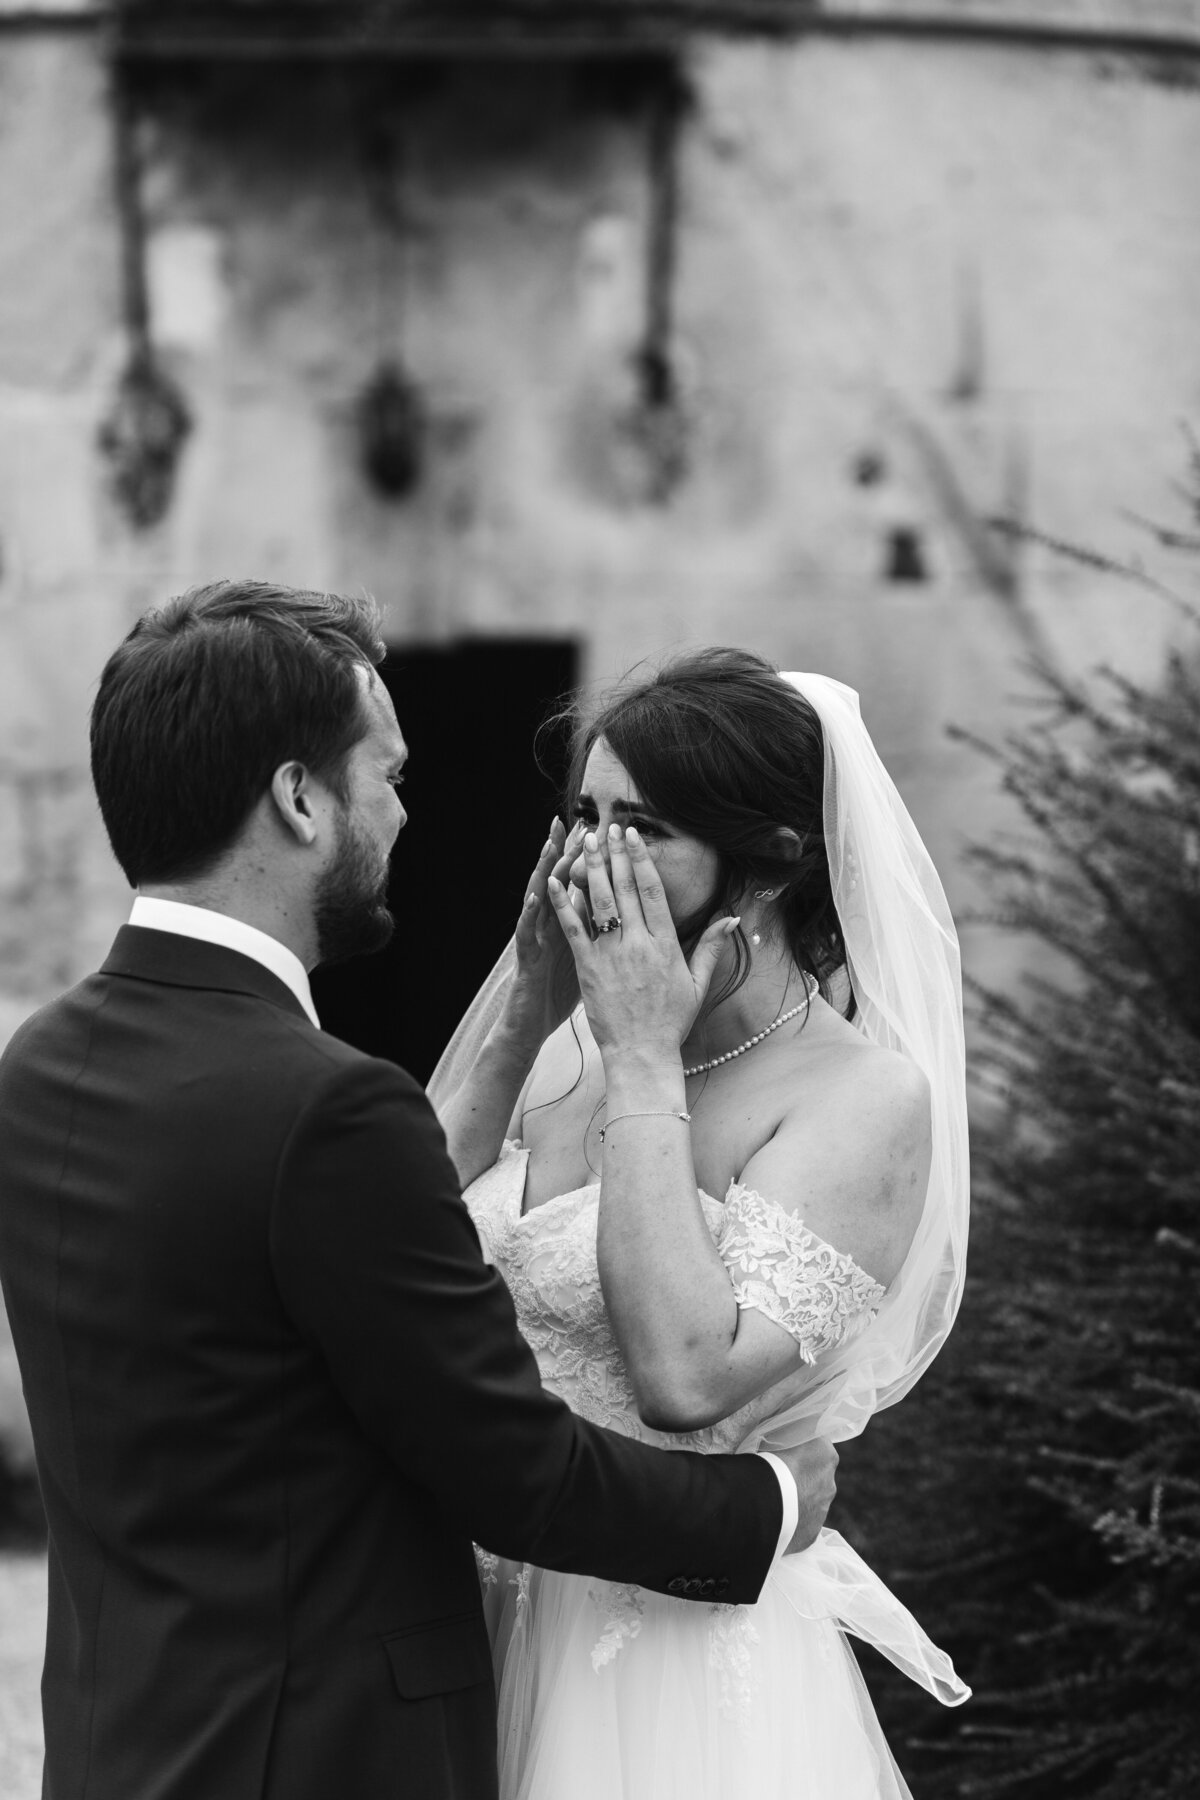 candid moment of crying bride during the wedding ceremony in France